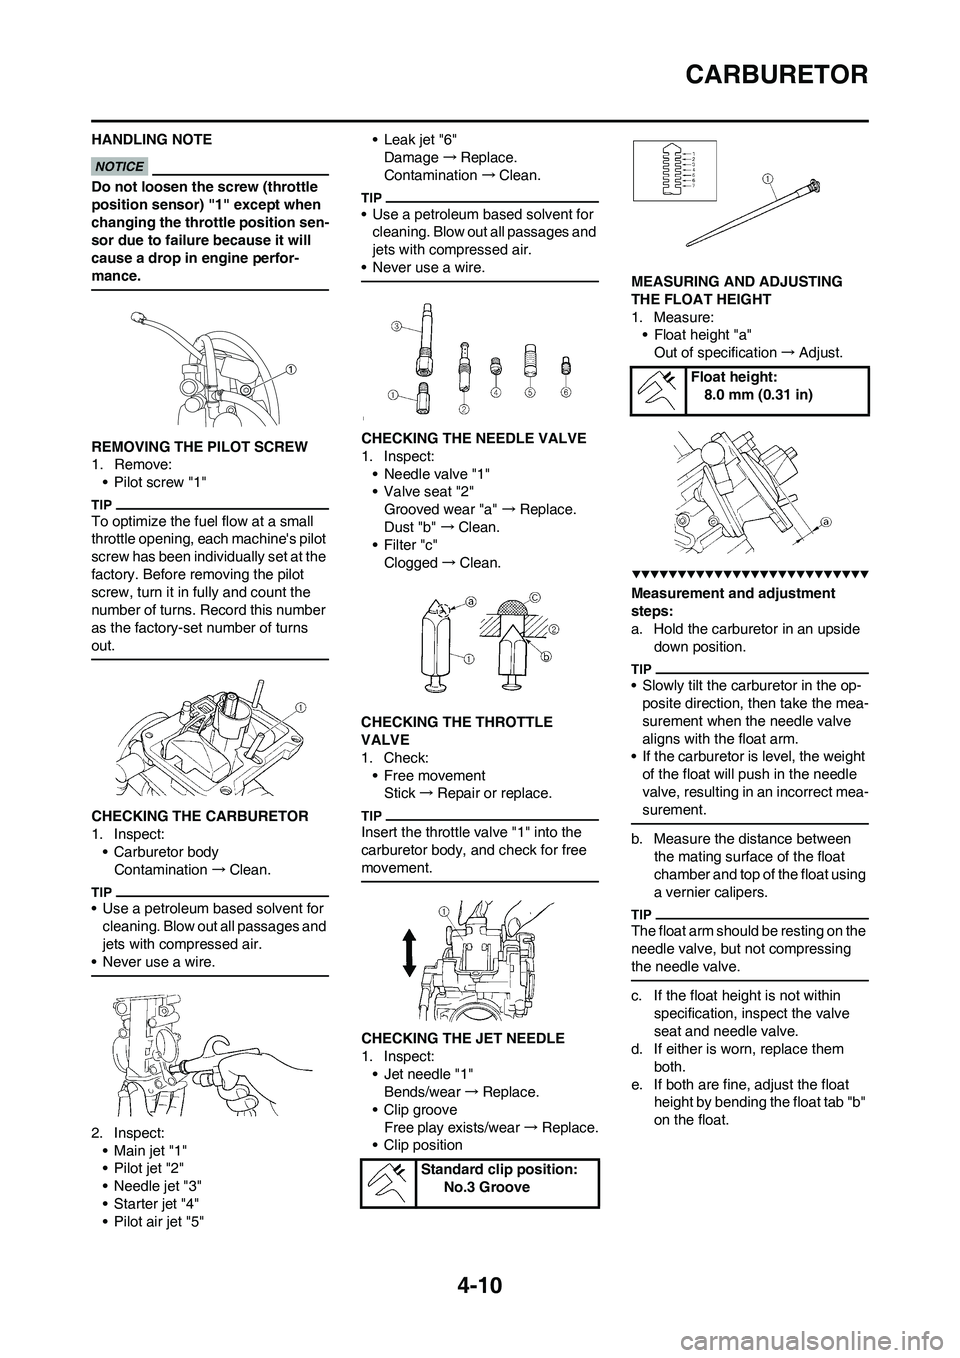 YAMAHA YZ450F 2009  Owners Manual 4-10
CARBURETOR
HANDLING NOTE
Do not loosen the screw (throttle 
position sensor) "1" except when 
changing the throttle position sen-
sor due to failure because it will 
cause a drop in engine perfor